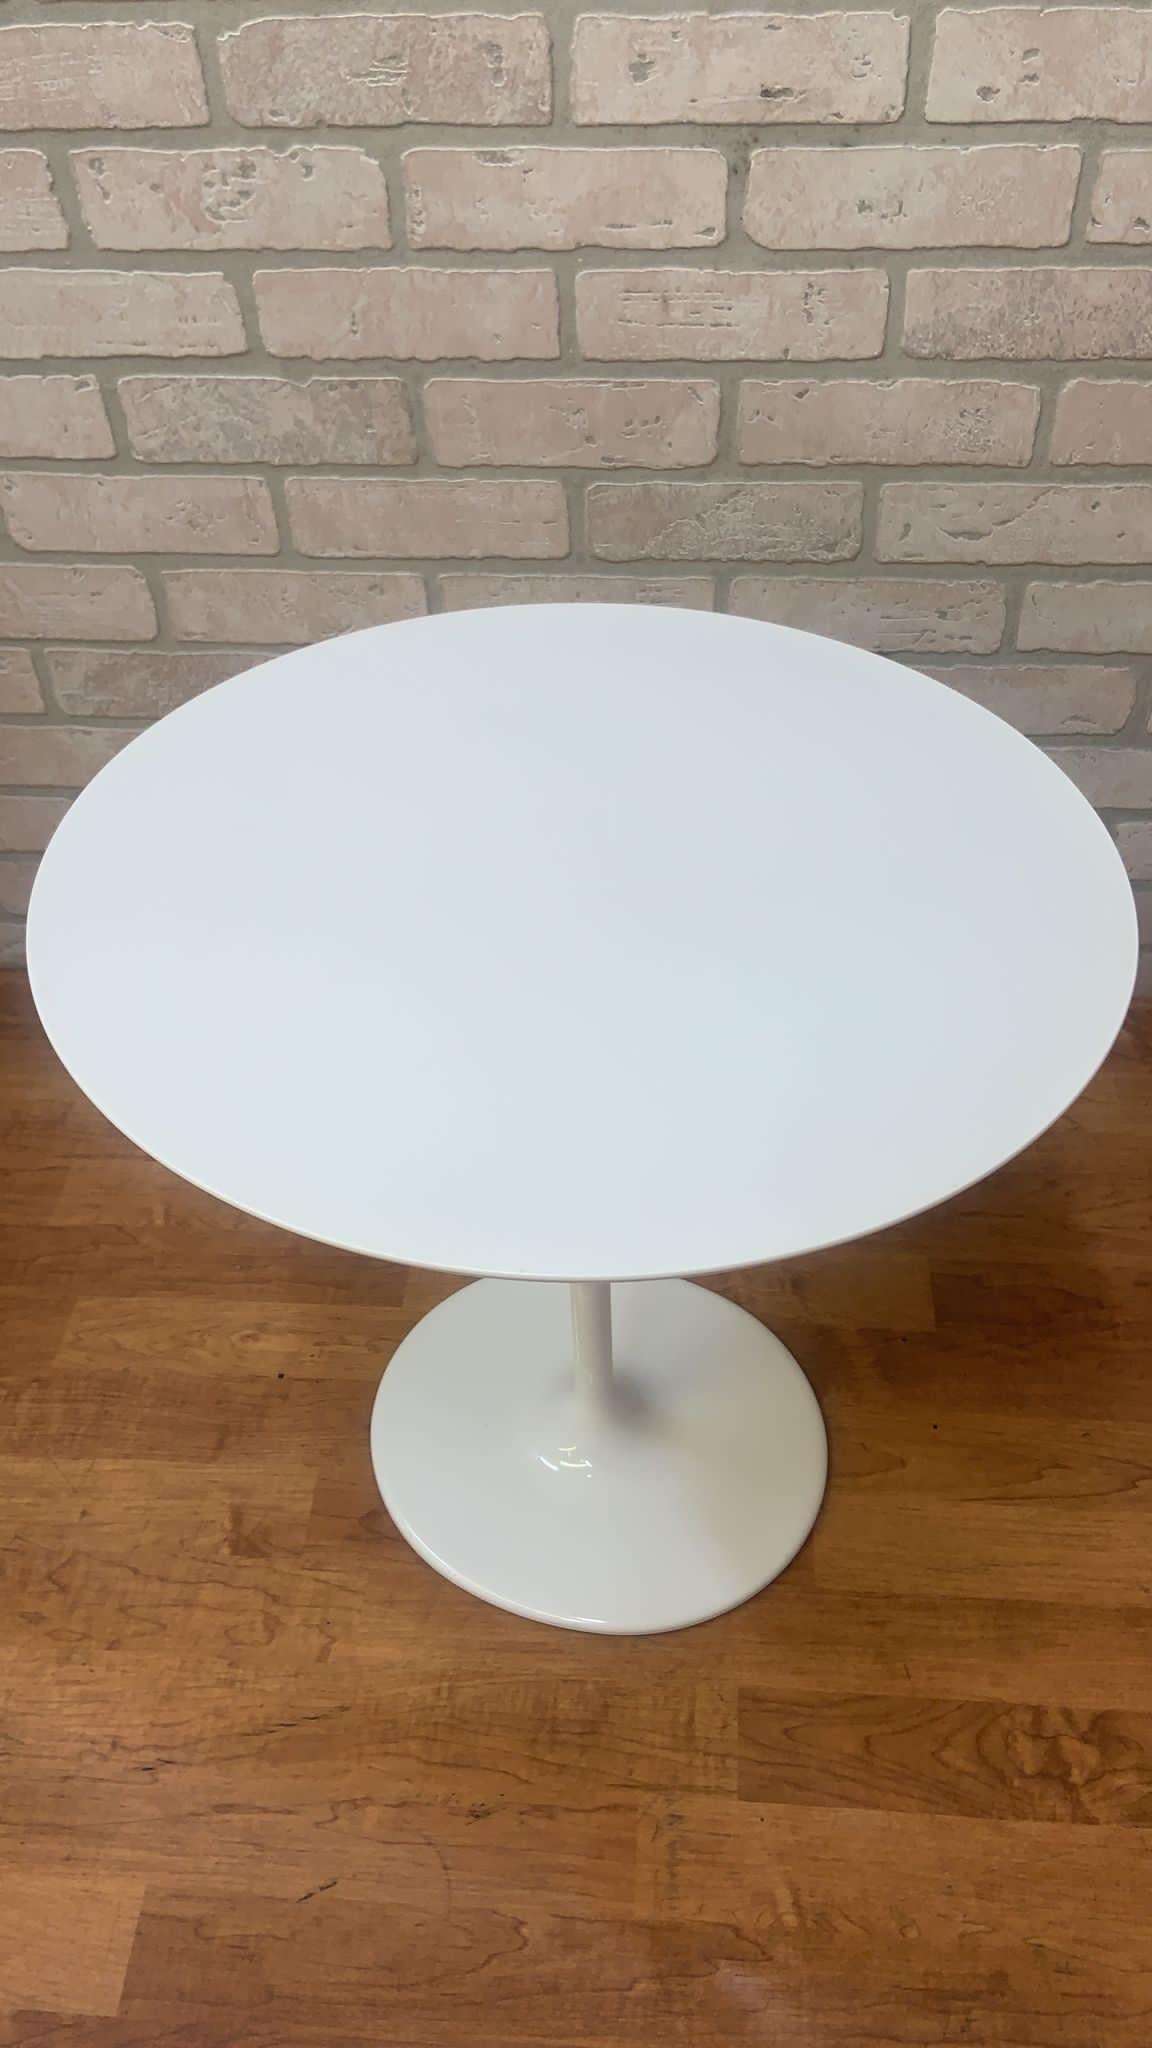 Post Modern Dizzie White Oval Base Side Table by Lievore Altherr Molina for Arper

This white, glossy, oval base side table has been designed by Lievore Altherr Molina for Arper. This side table has made out of steel and has been laminated in a